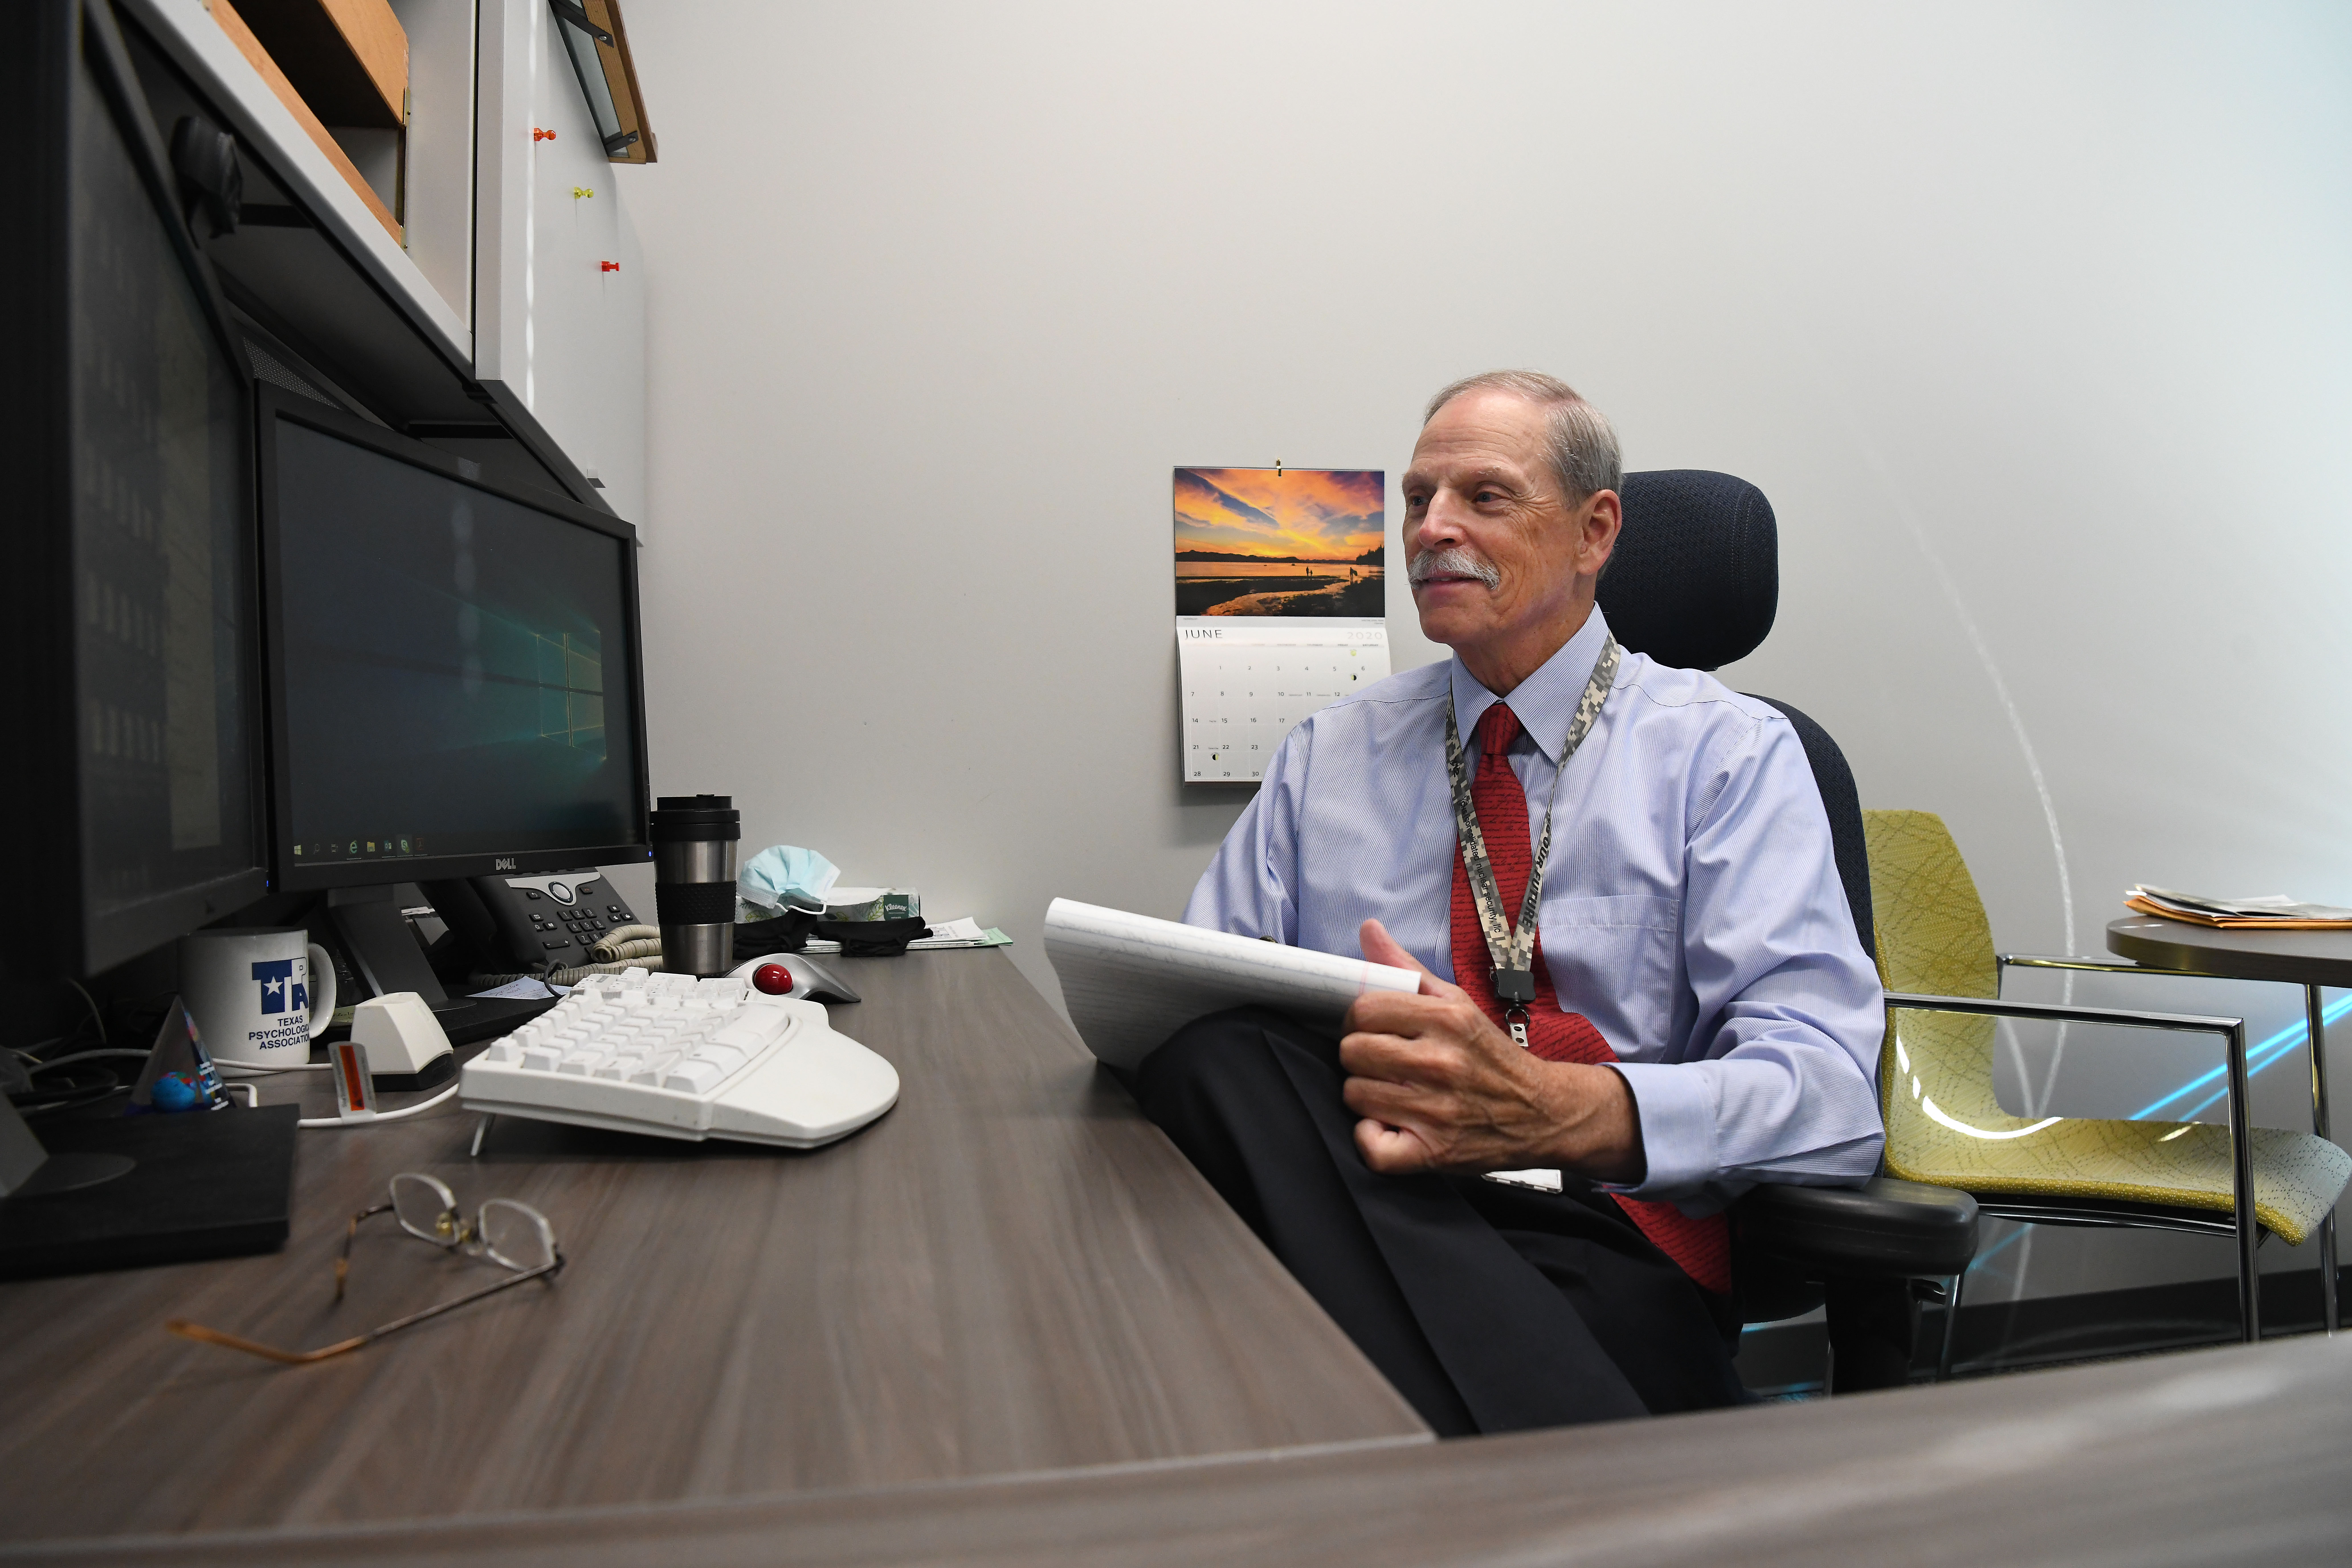 Dr. Mark Izzard conducts a telepsychology session from his office at Pantex.